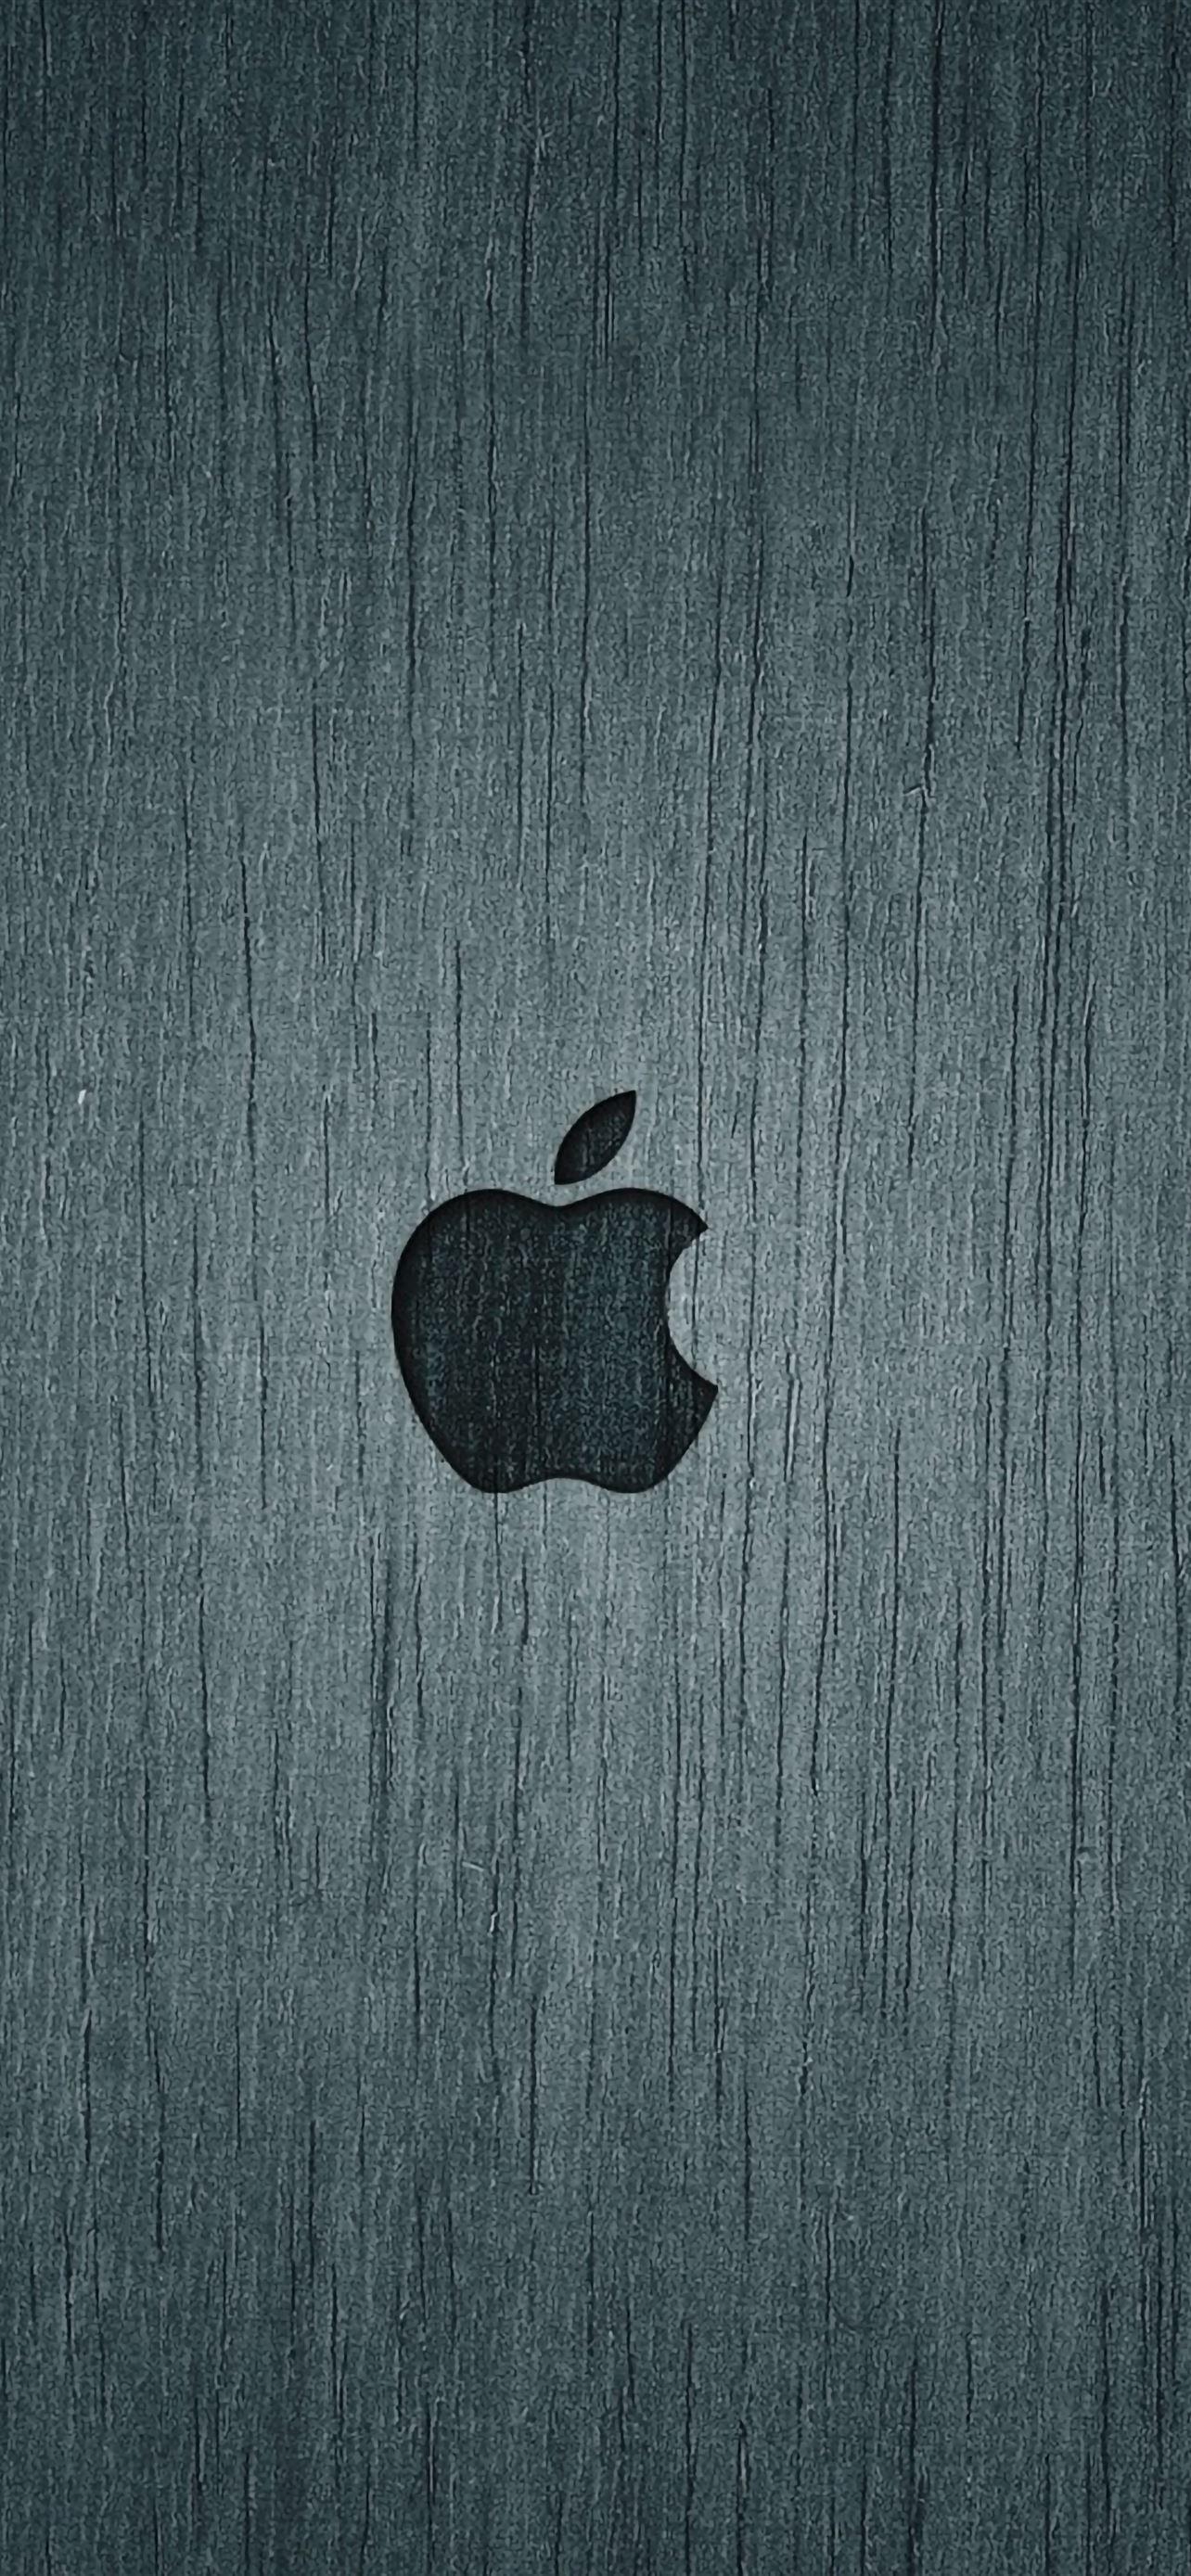 Black Wood iPhone Wallpapers - Top Free Black Wood iPhone Backgrounds ...